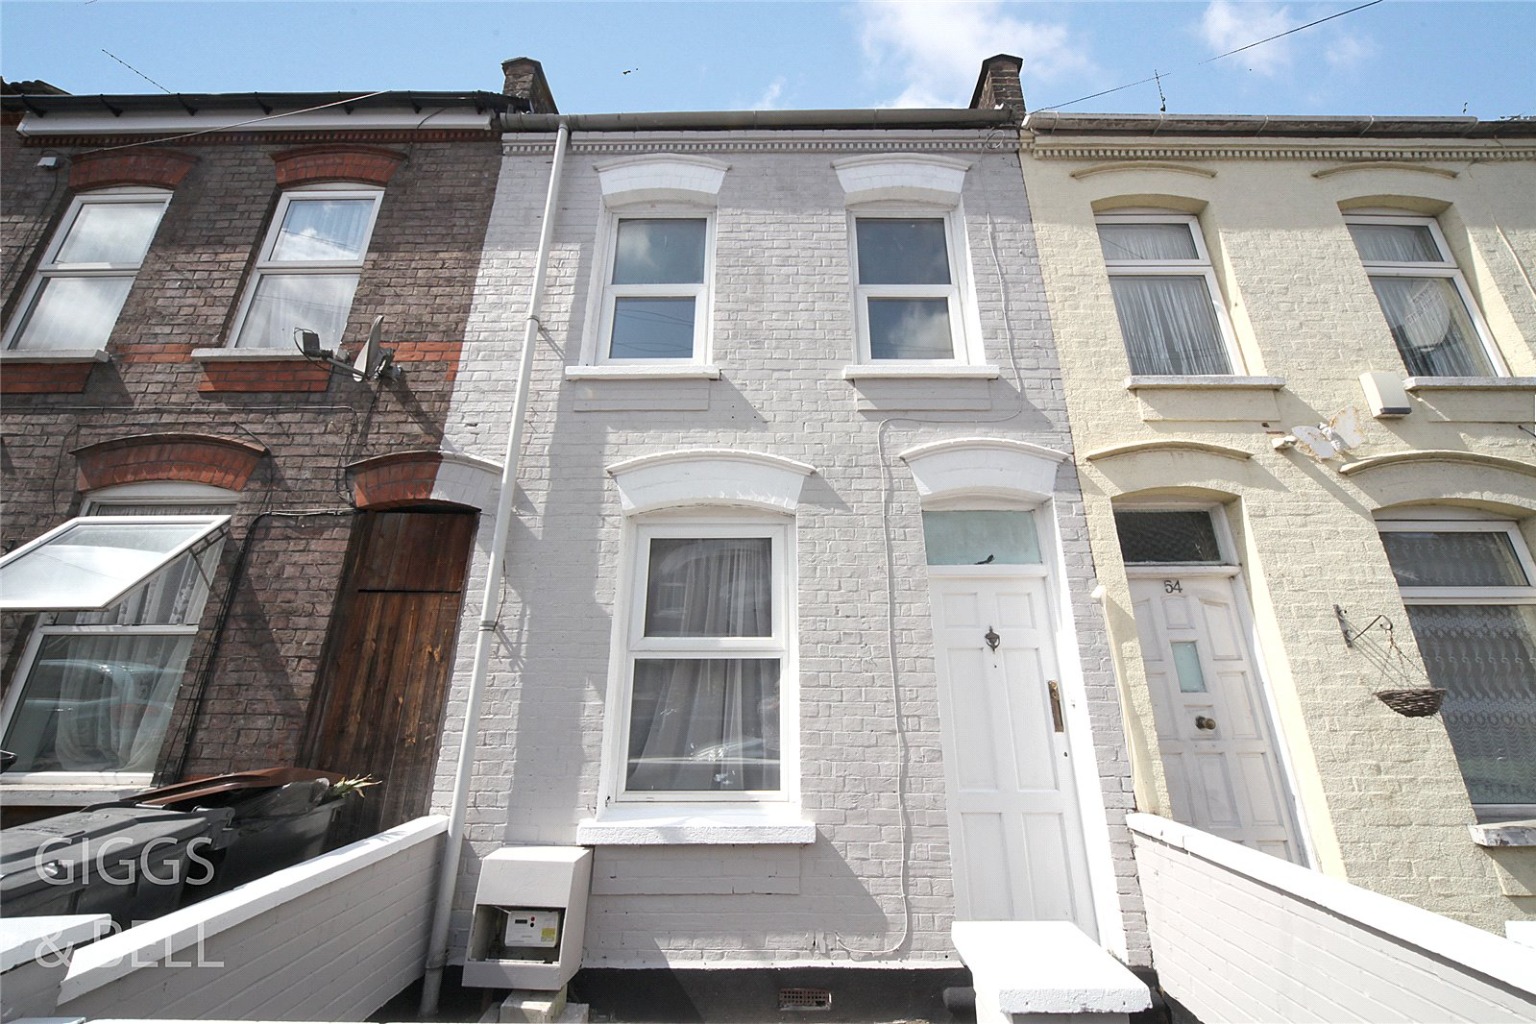 2 bed terraced house for sale in St Peters Road, Luton, LU1 